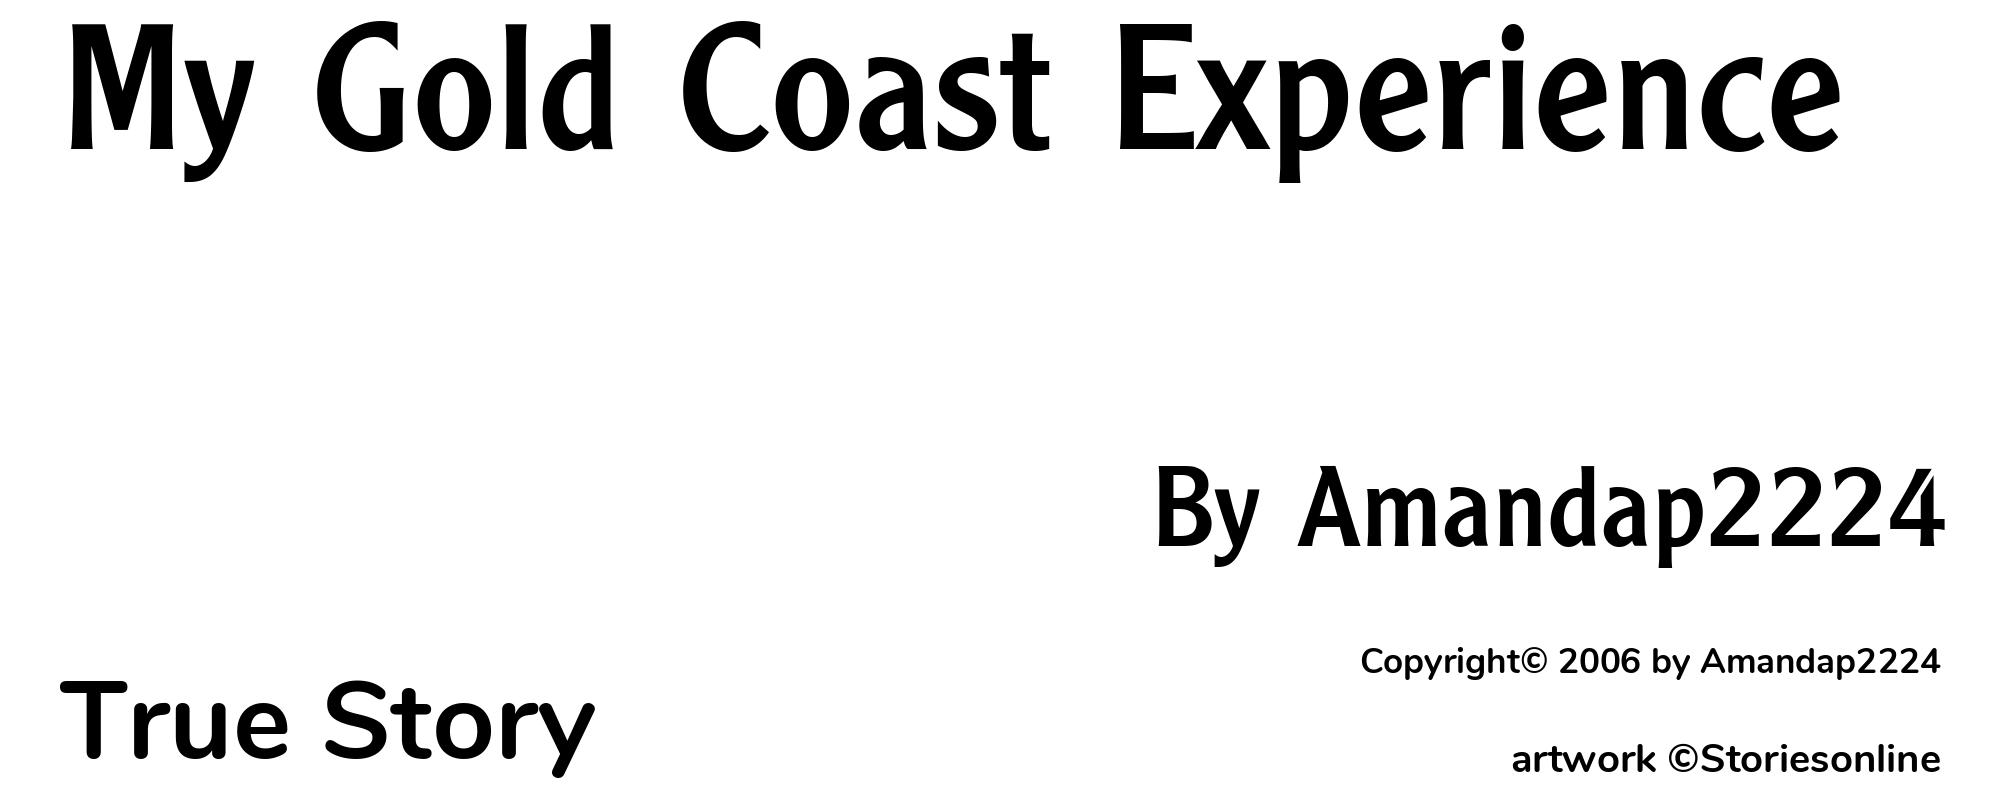 My Gold Coast Experience - Cover